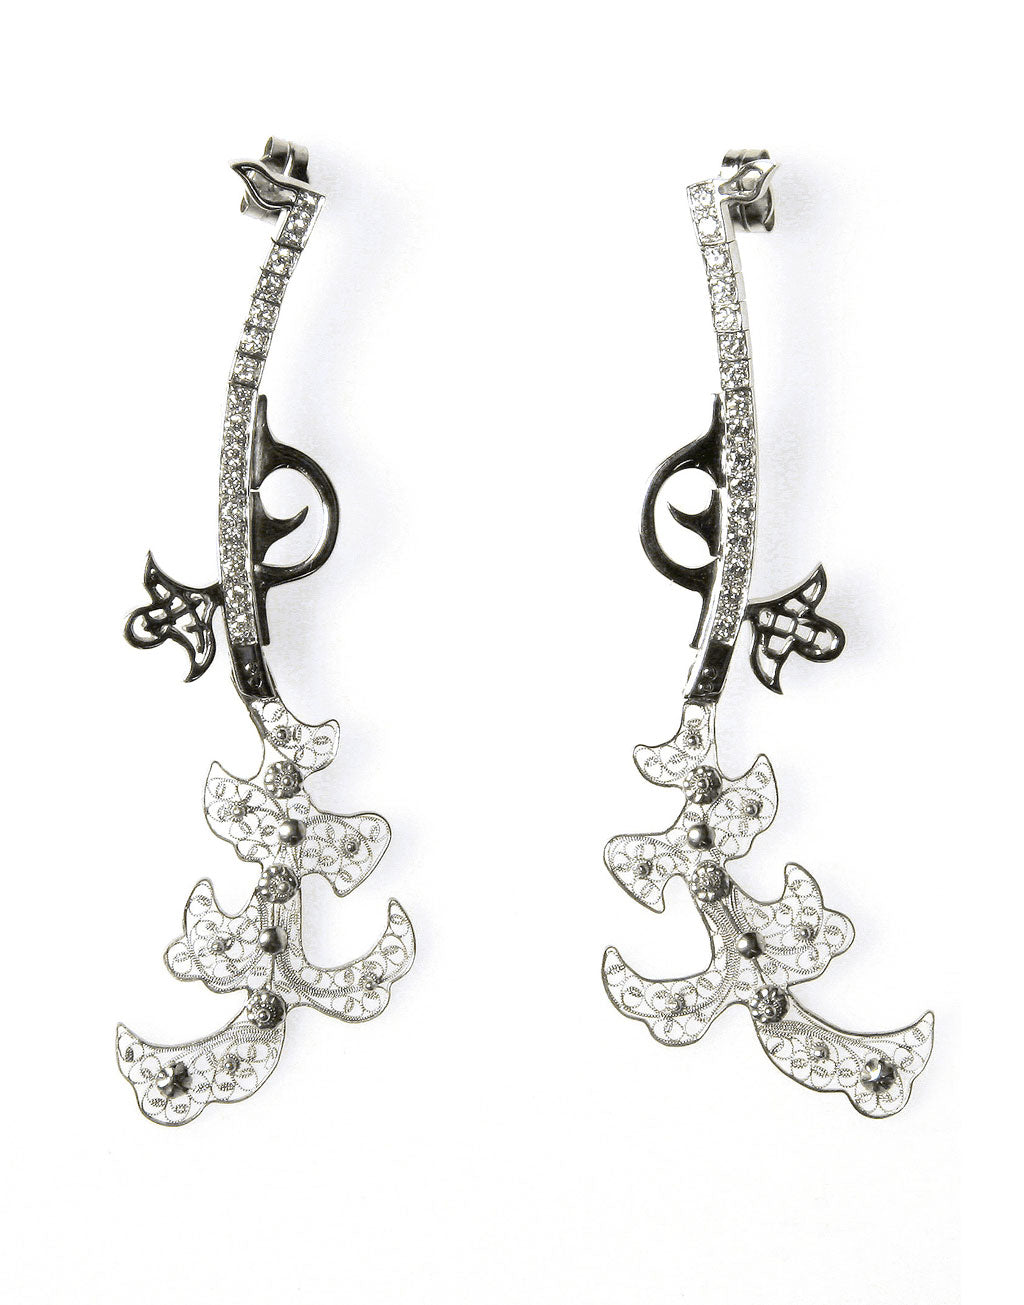 Heaven & Hell: unique and hand-crafted filigree earrings cast in white gold ands set with diamonds